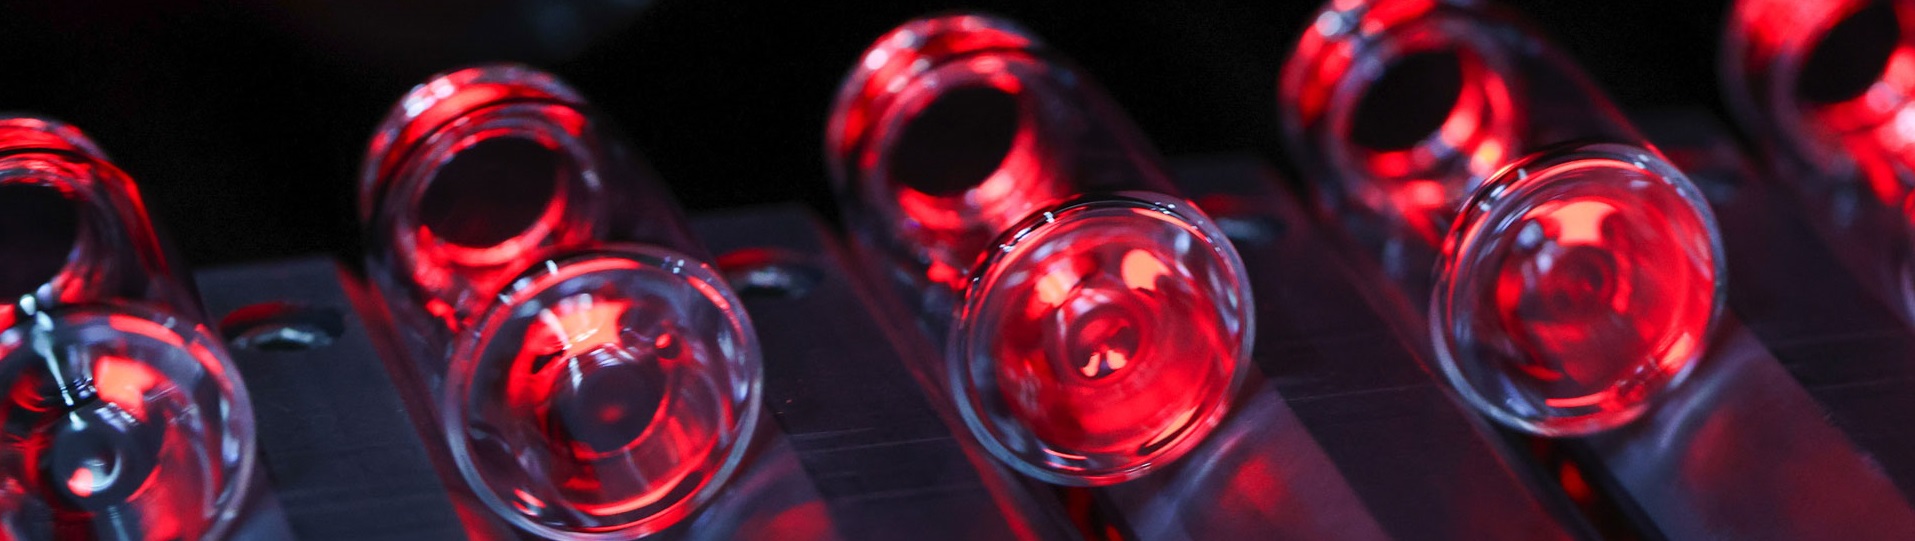 An abstract image of vials under red light